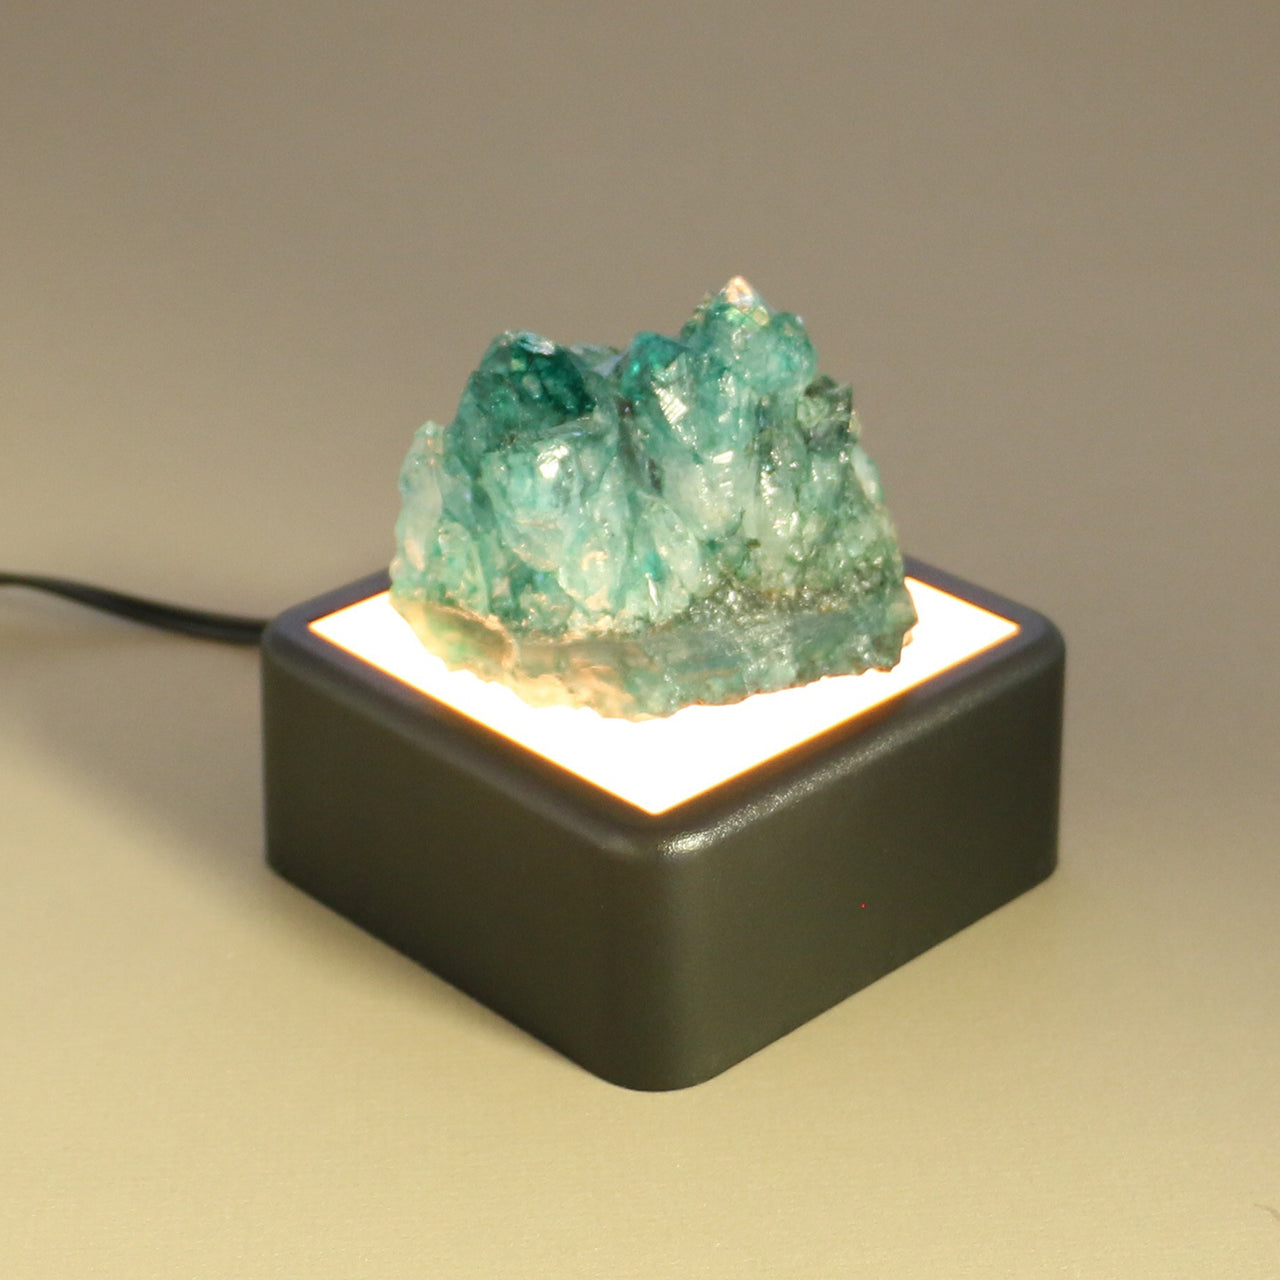 Lighted Display Box Riser for Glass, Minerals, & Spheres